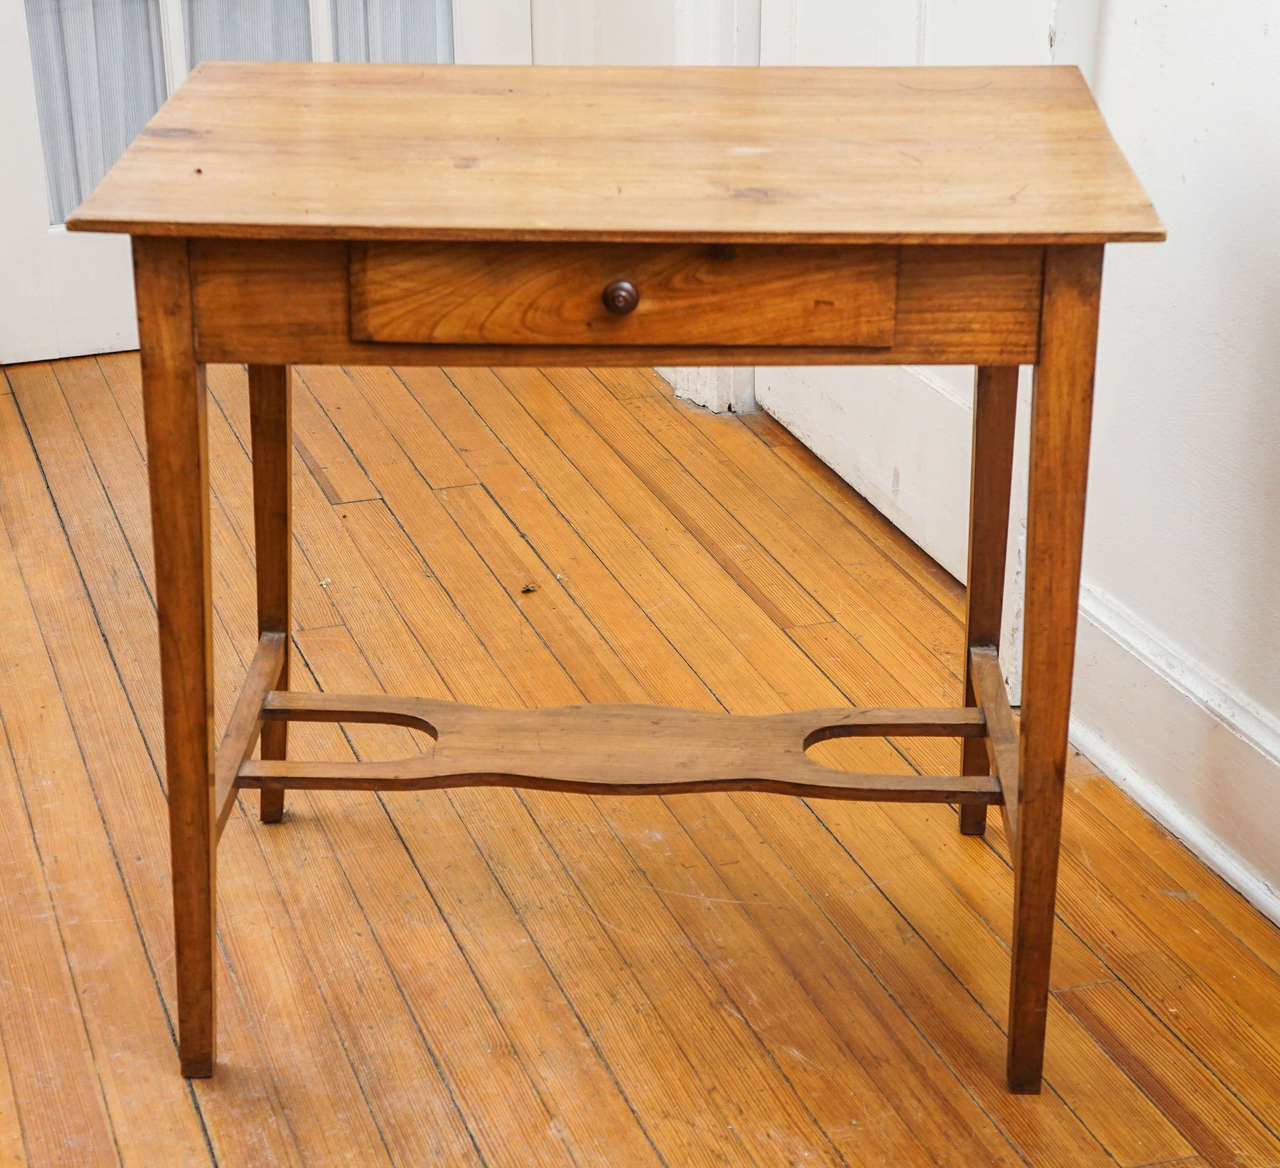 This one-drawer side table is highlighted be an unusual shelf on the bottom and an accent color wooden knob. The size is nothing short of perfect for an end table or a side table and you can't go wrong with fruitwood from France. This is a lighter